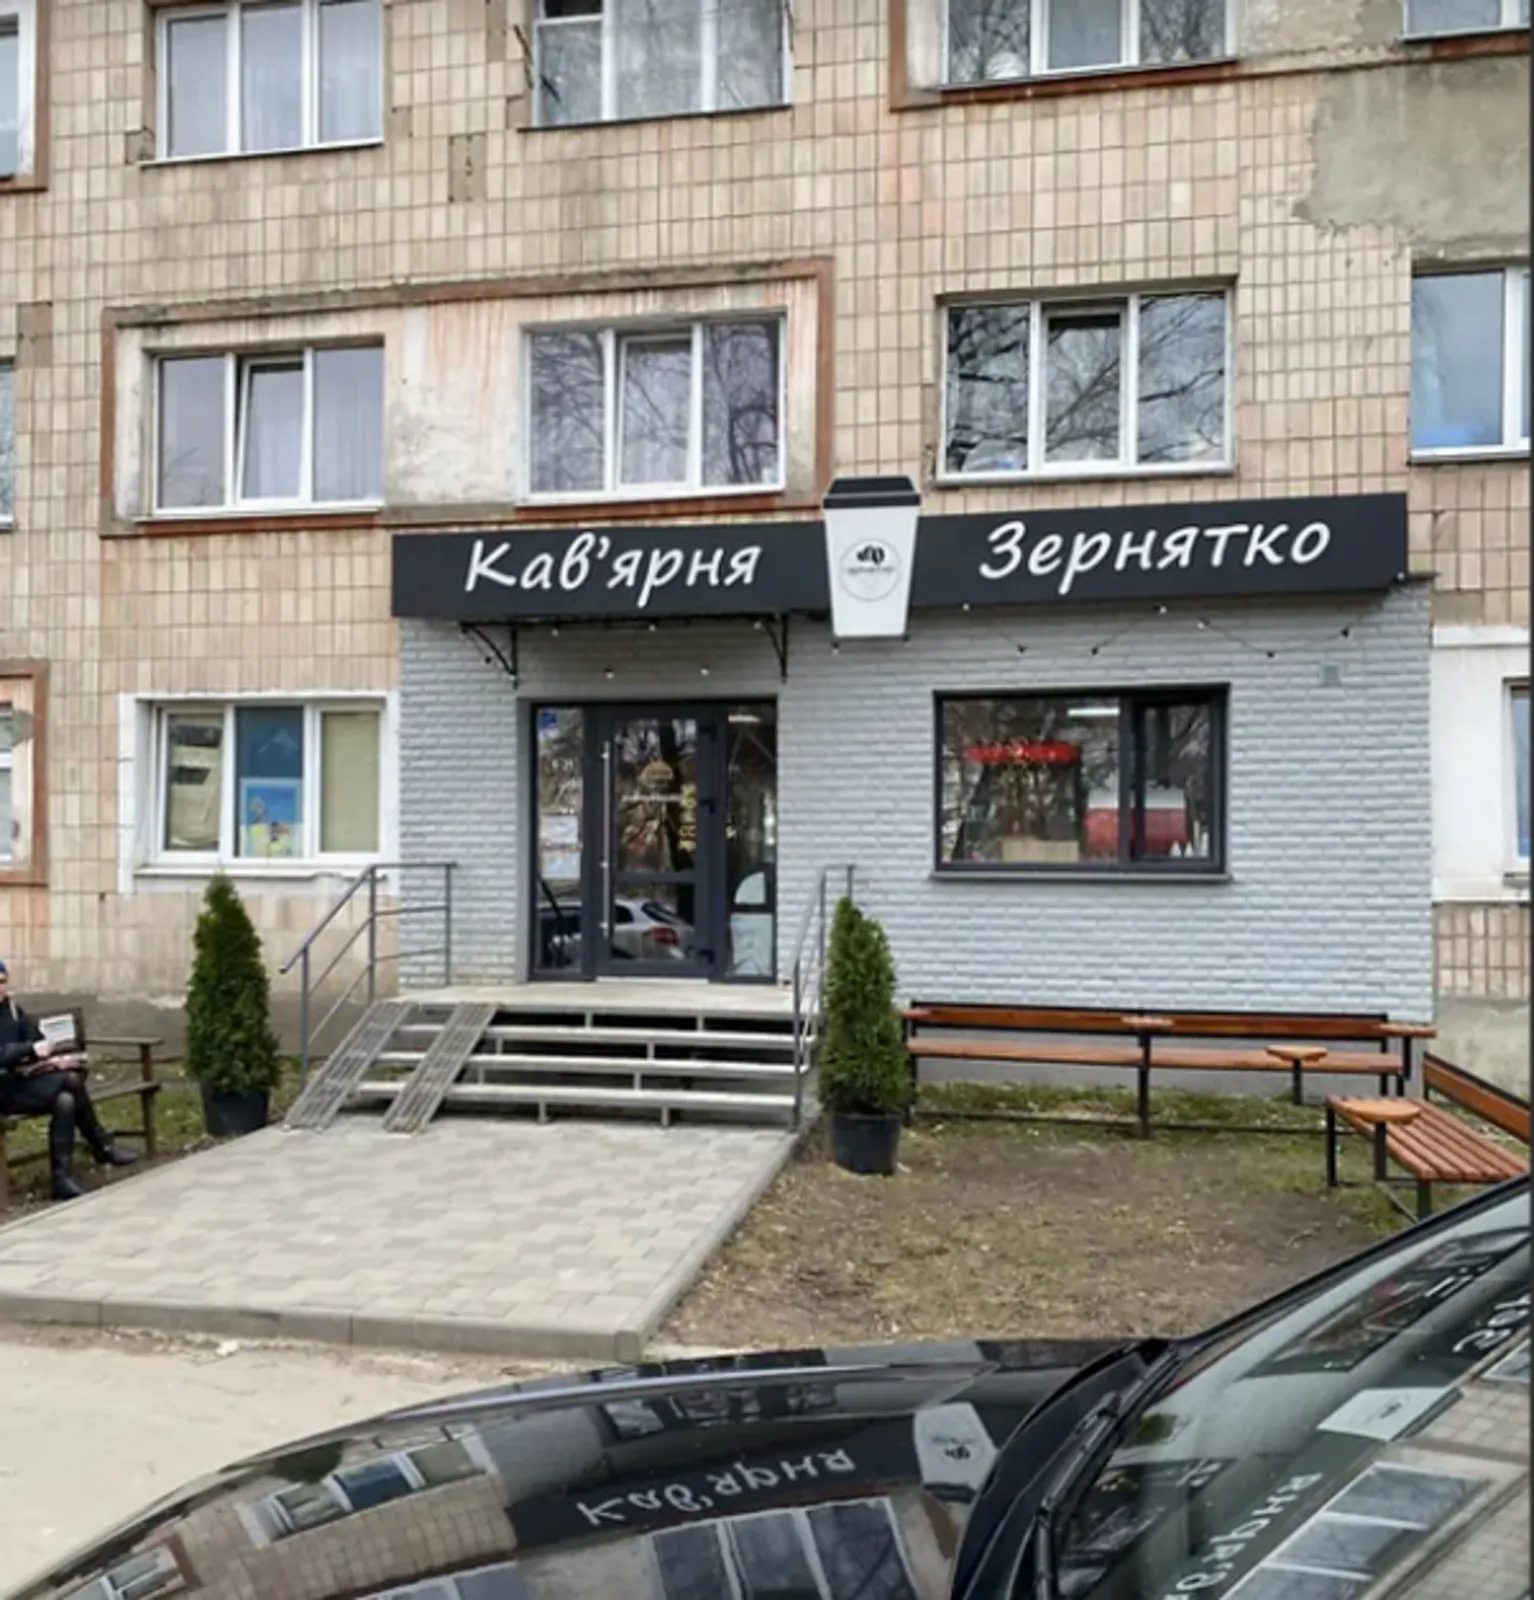 Real estate for sale for commercial purposes. 32 m², 1st floor/5 floors. Vostochnyy, Ternopil. 